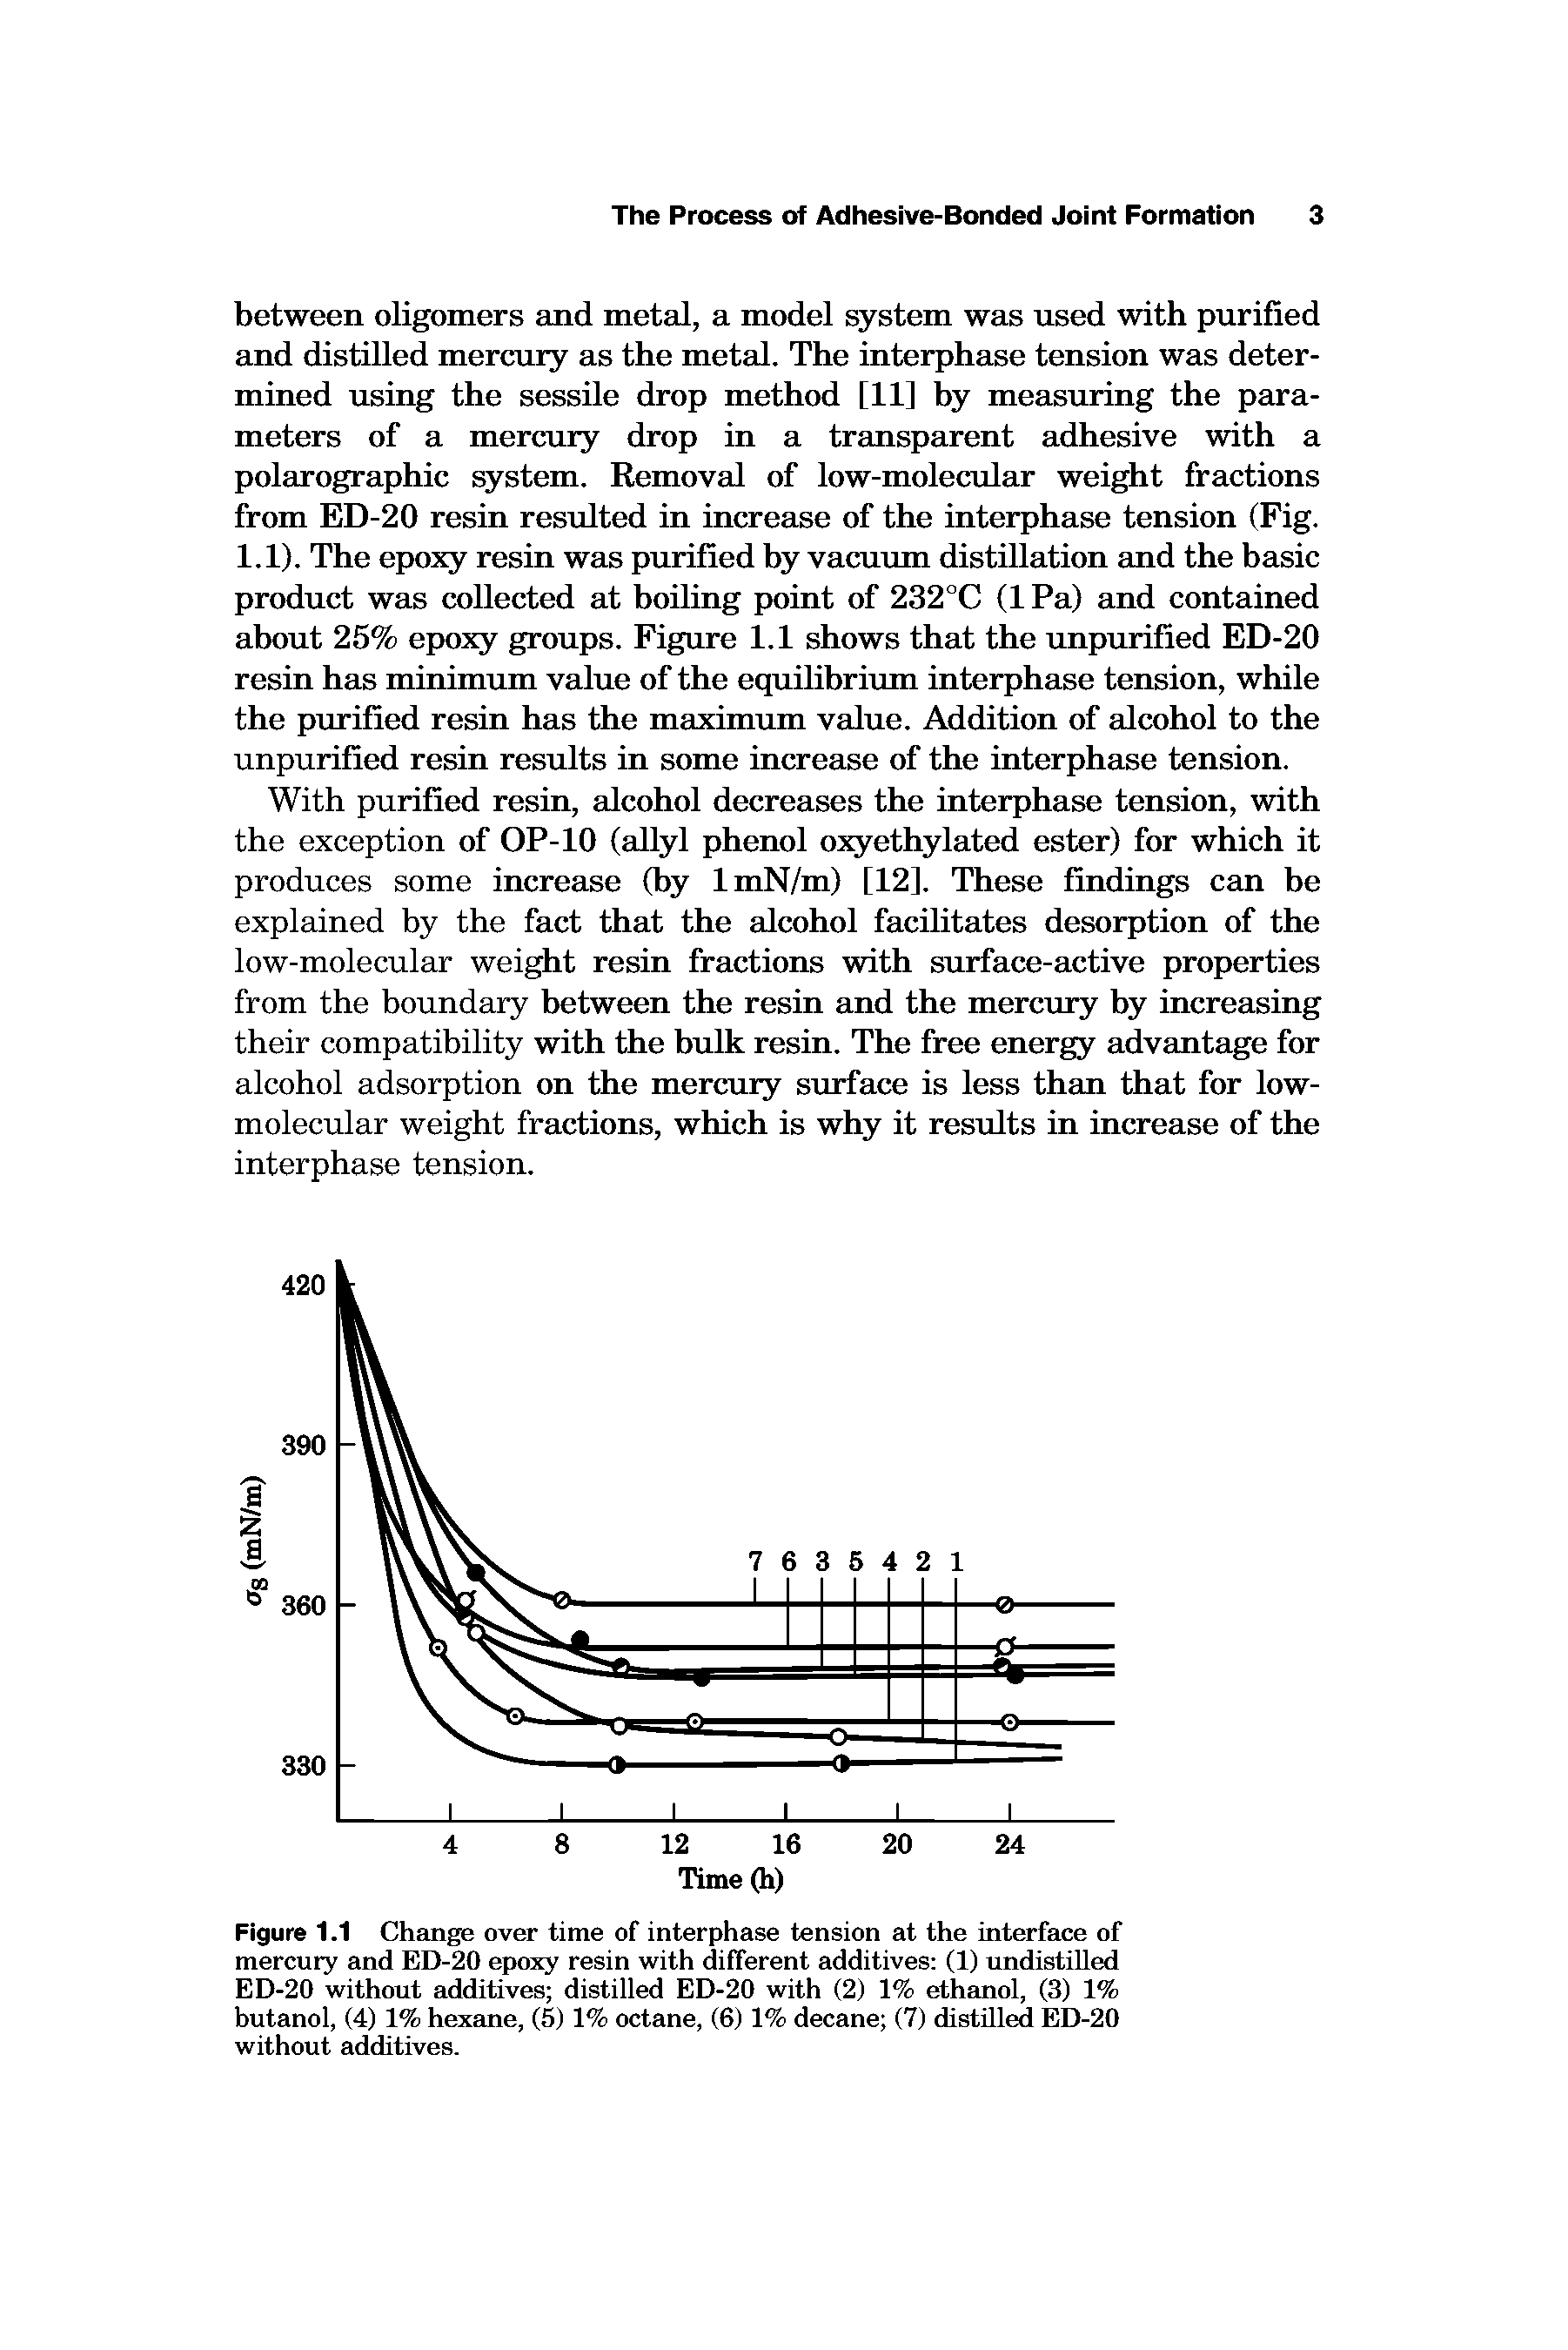 Figure 1.1 Change over time of interphase tension at the interface of mercury and ED-20 epoxy resin with different additives (1) undistilled ED-20 without additives distilled ED-20 with (2) 1% ethanol, (3) 1% butanol, (4) 1% hexane, (5) 1% octane, (6) 1% decane (7) distilled ED-20 without additives.